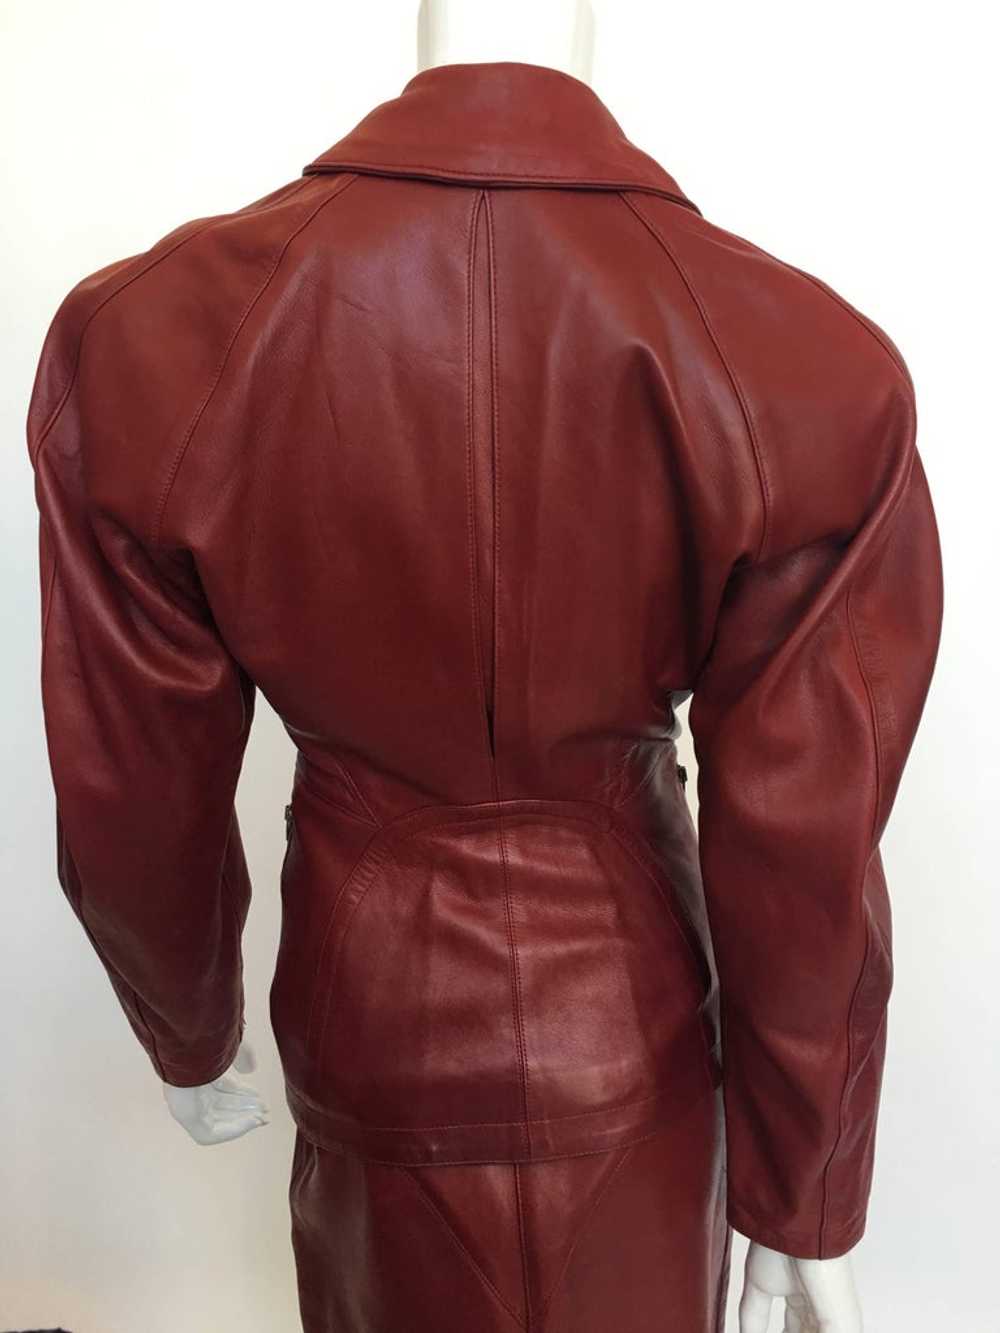 Alaïa 1980's Red Leather Skirt Suit - image 4